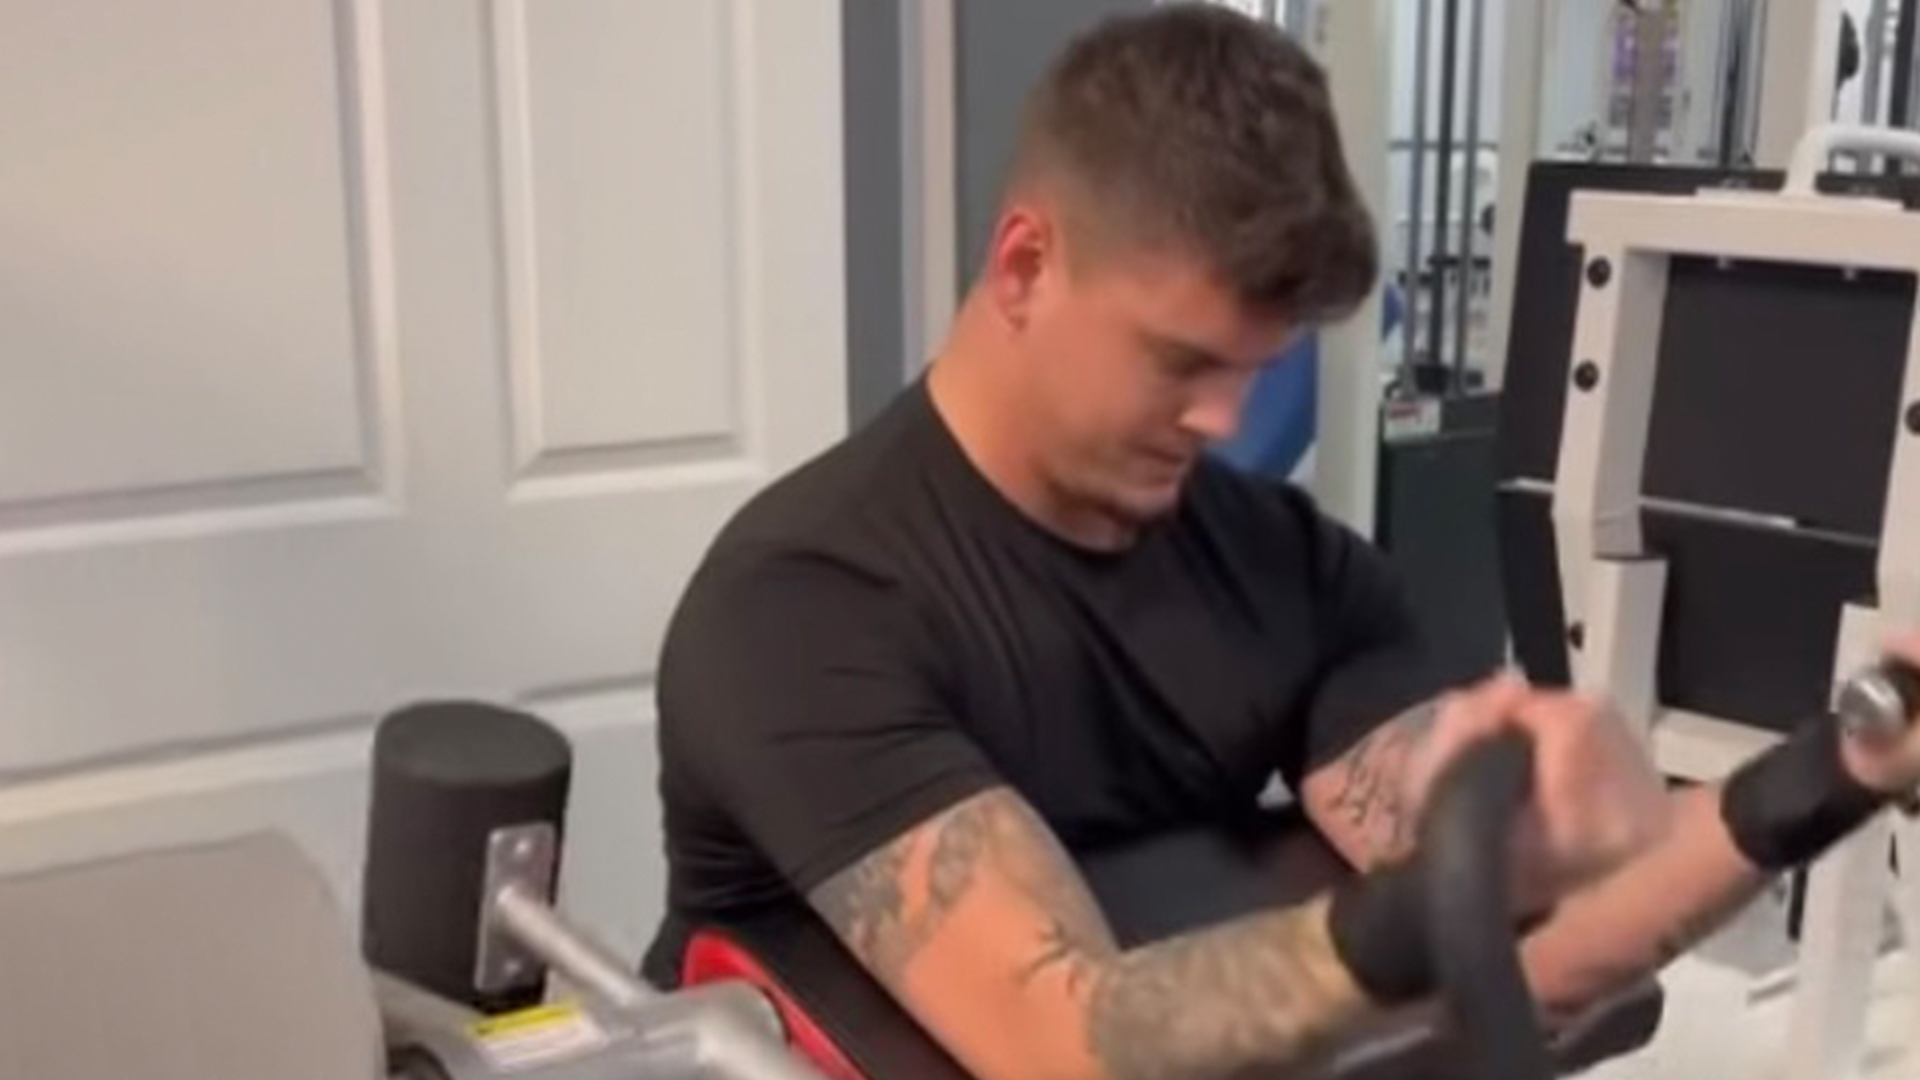 Teen Mom Catelynn Lowell gushes over ‘handsome’ husband Tyler Baltierra as star shows off muscles under tight shirt